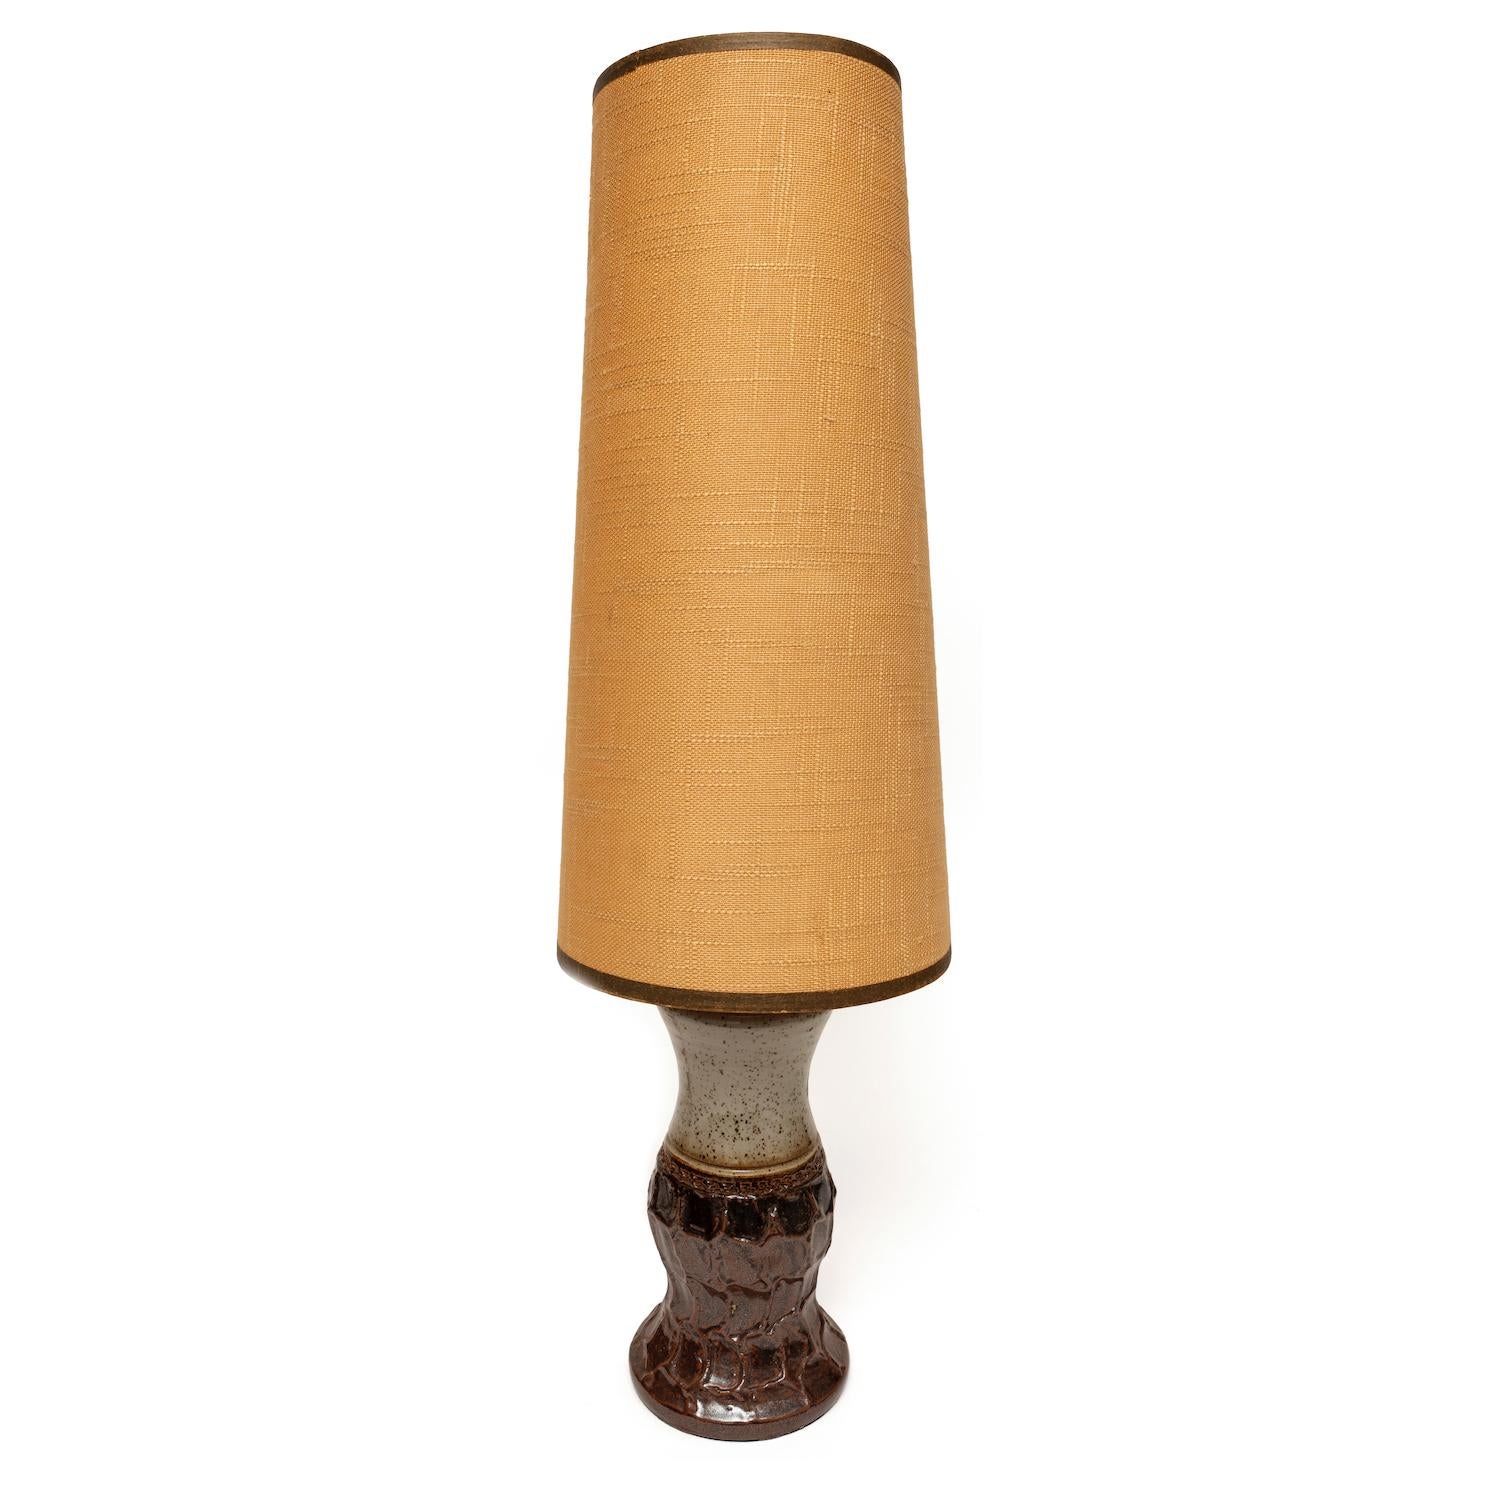 WEST GERMAN, MID-CENTURY MODERN, BROWN & STONE, CERAMIC VASE LAVA TABLE LAMP WITH ORIGINAL GOLD LINEN SHADE 62cm, 24 ½ inches high
Striking statement piece with the large shade and the contrasting textures and patterning
Vase shaped, ceramic base